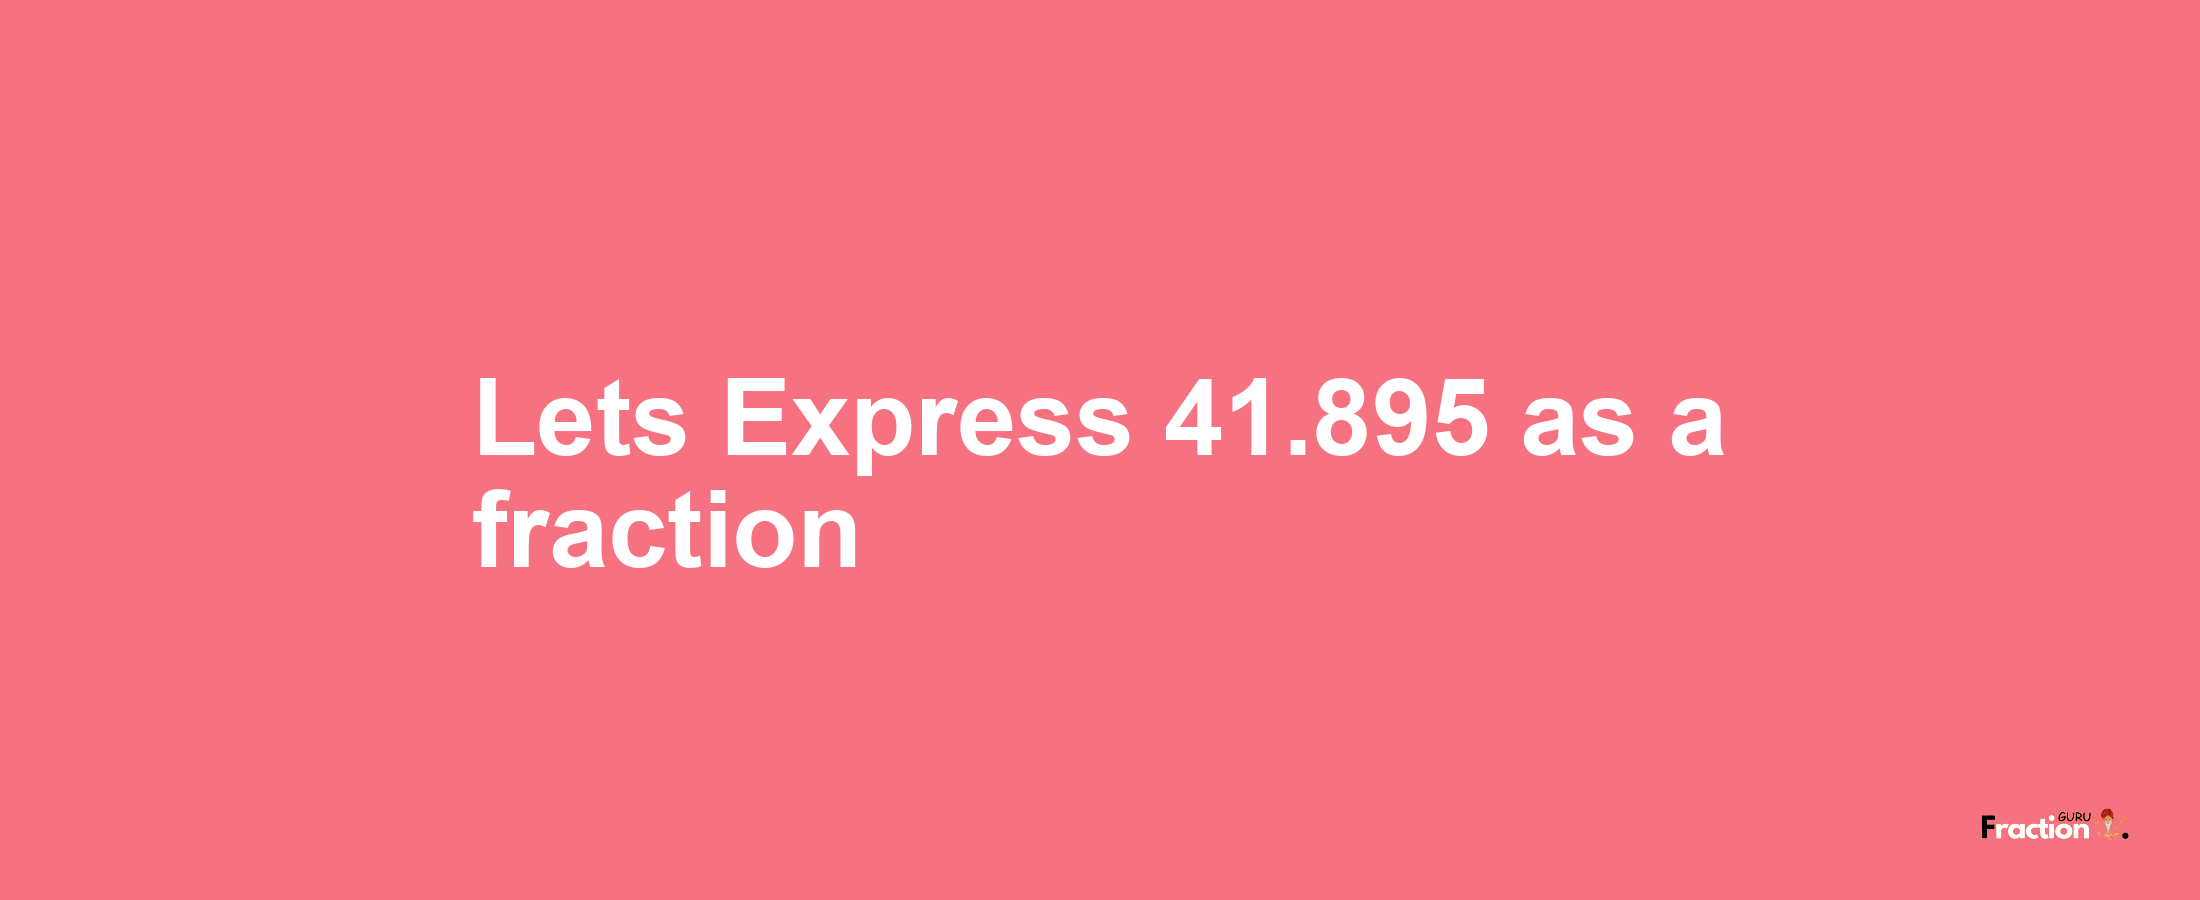 Lets Express 41.895 as afraction